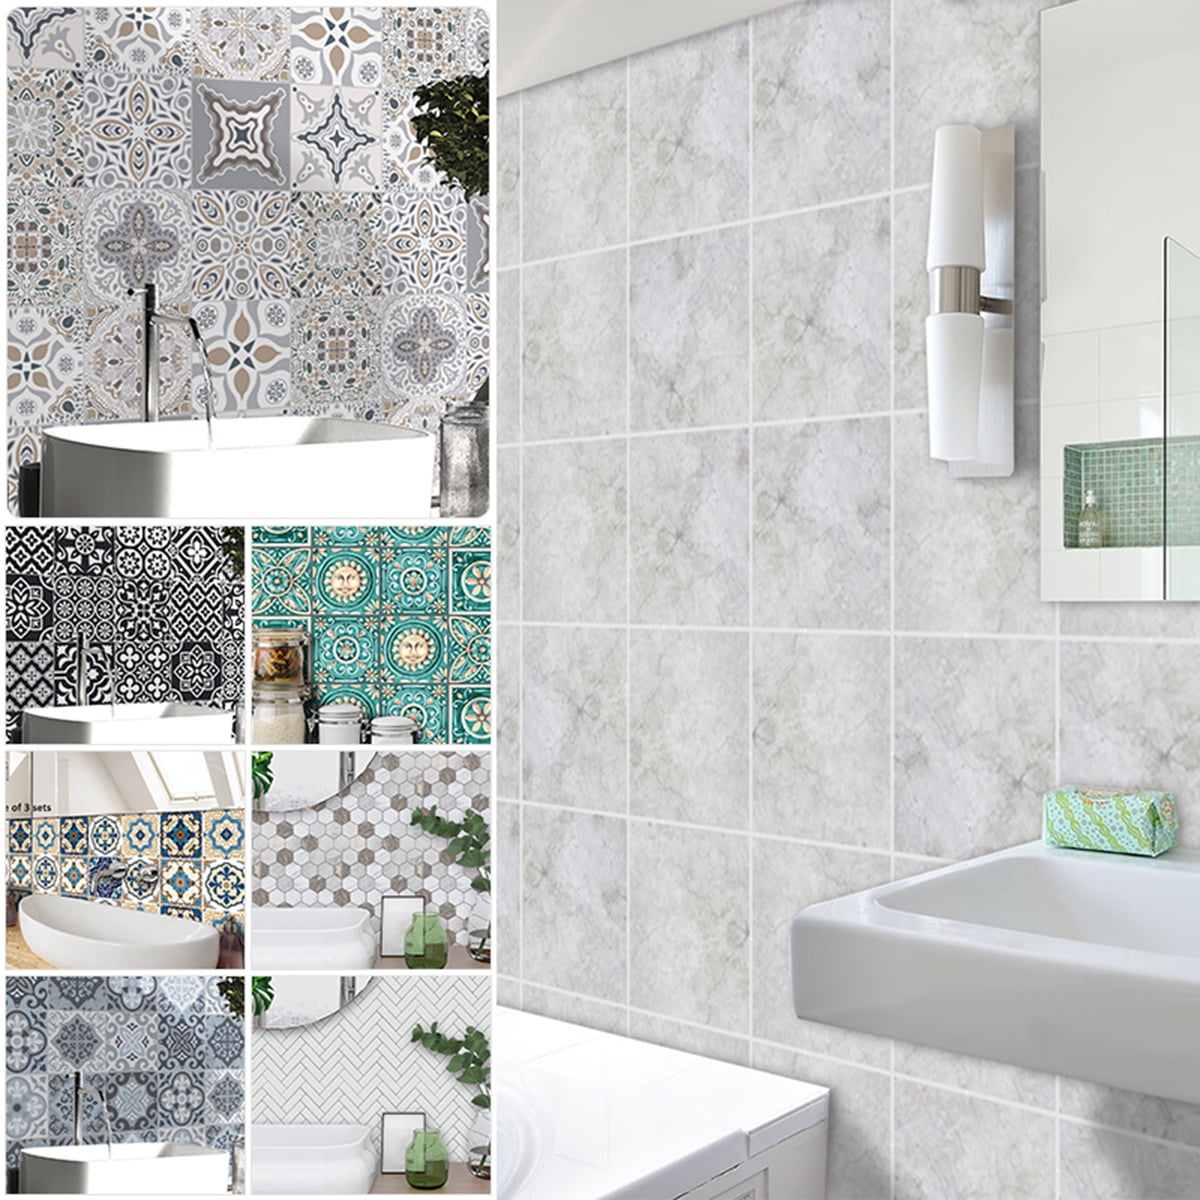 Waterproof Backsplash Stickers for Kitchen Bathroom Decor HT007-15 Peel and Stick Tile Stickers 15x15cm 10 Pcs Owill Self-Adhesive Wall Tile Decals